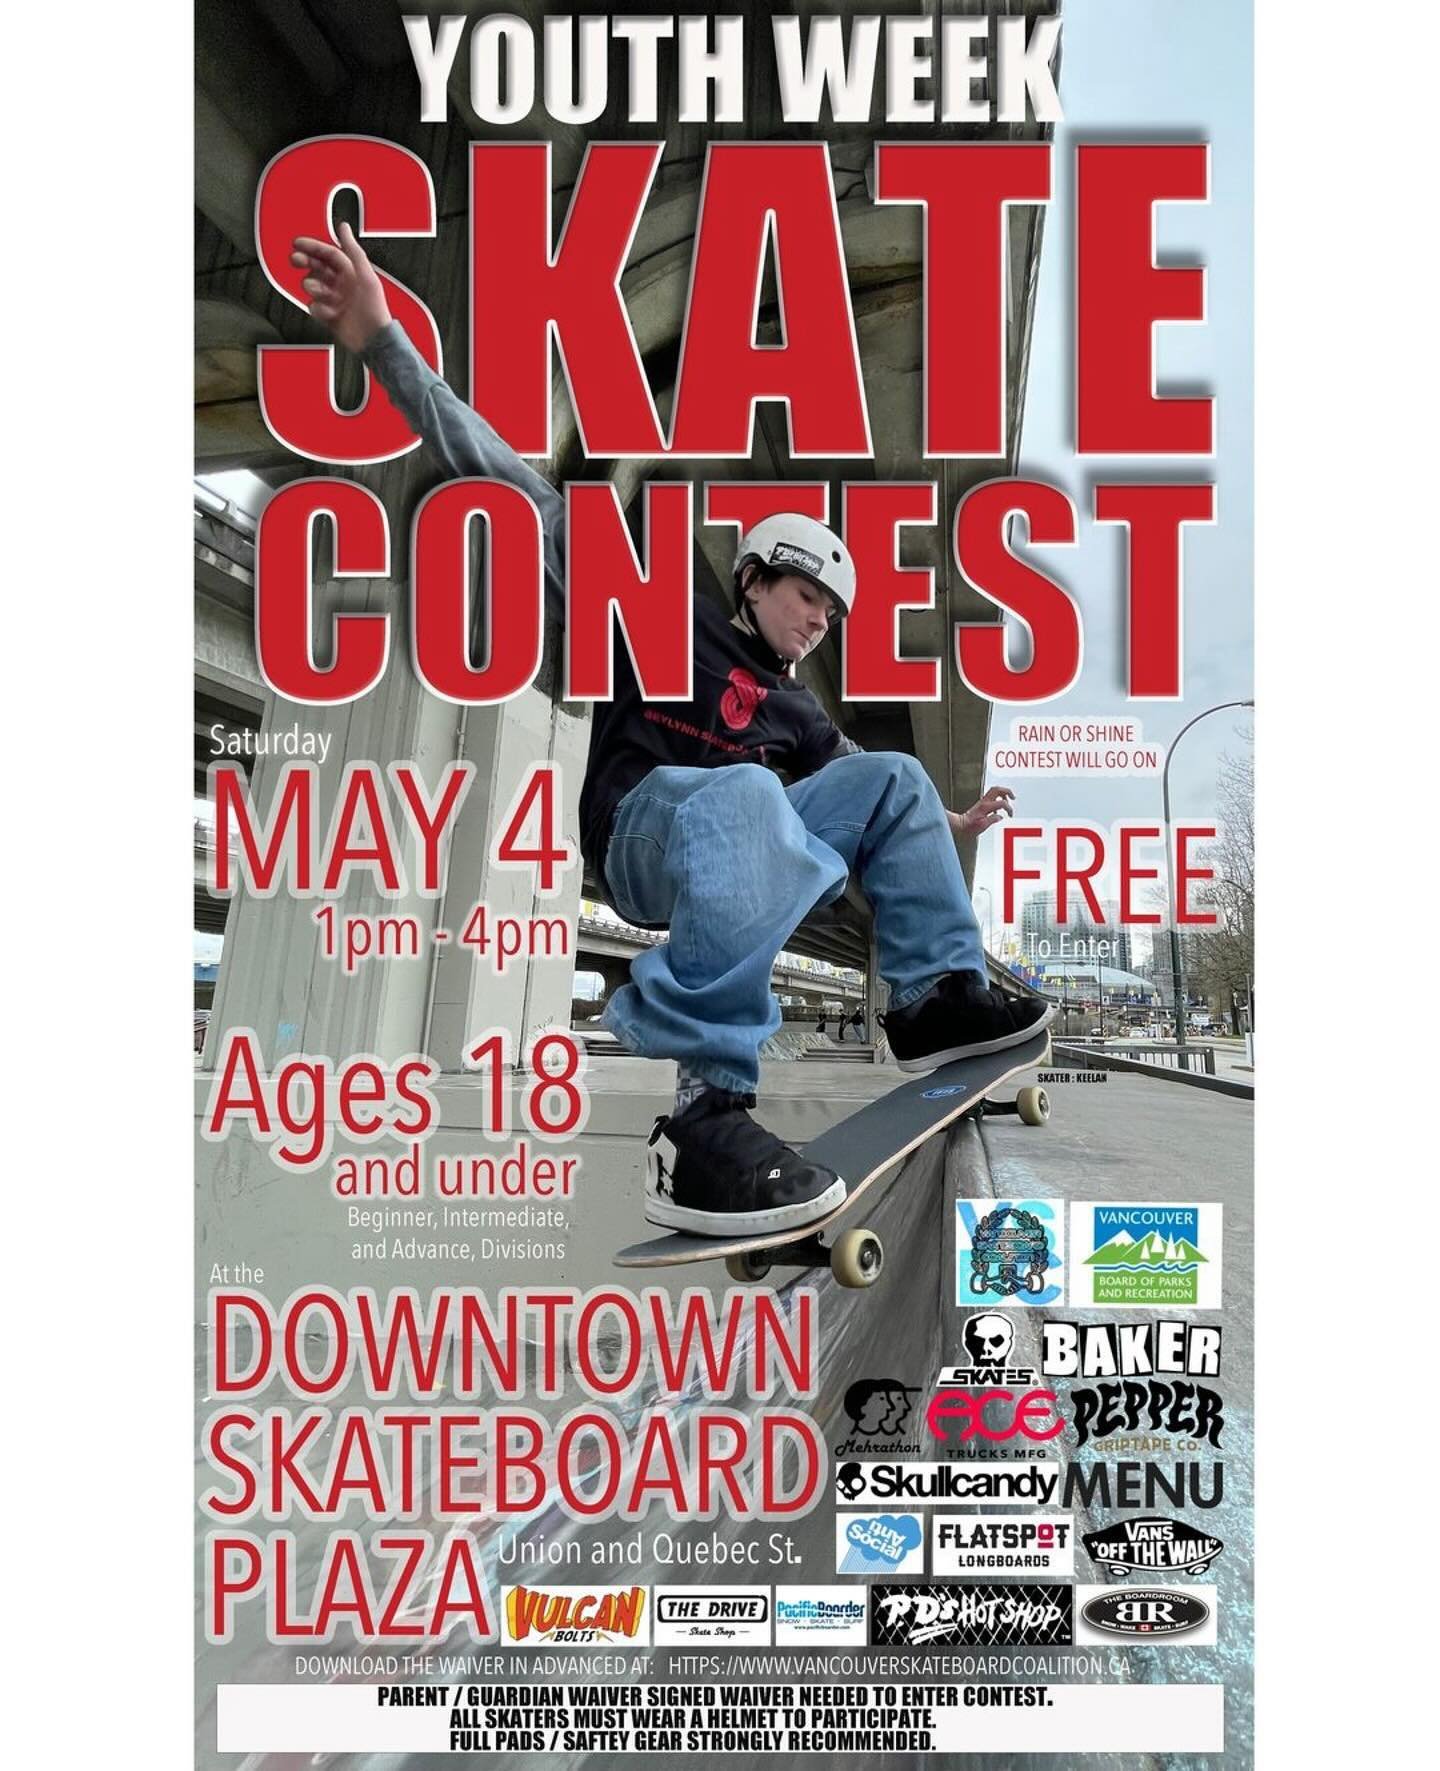 We are sponsoring the 14th annual Youth Week Skate Contest in partnership with @vanparkboard at @thevancouverskateplaza on Saturday May 4th from 1pm to 4pm.

All people under 18 of all abilities are welcome. We will have categories for beginner, inte